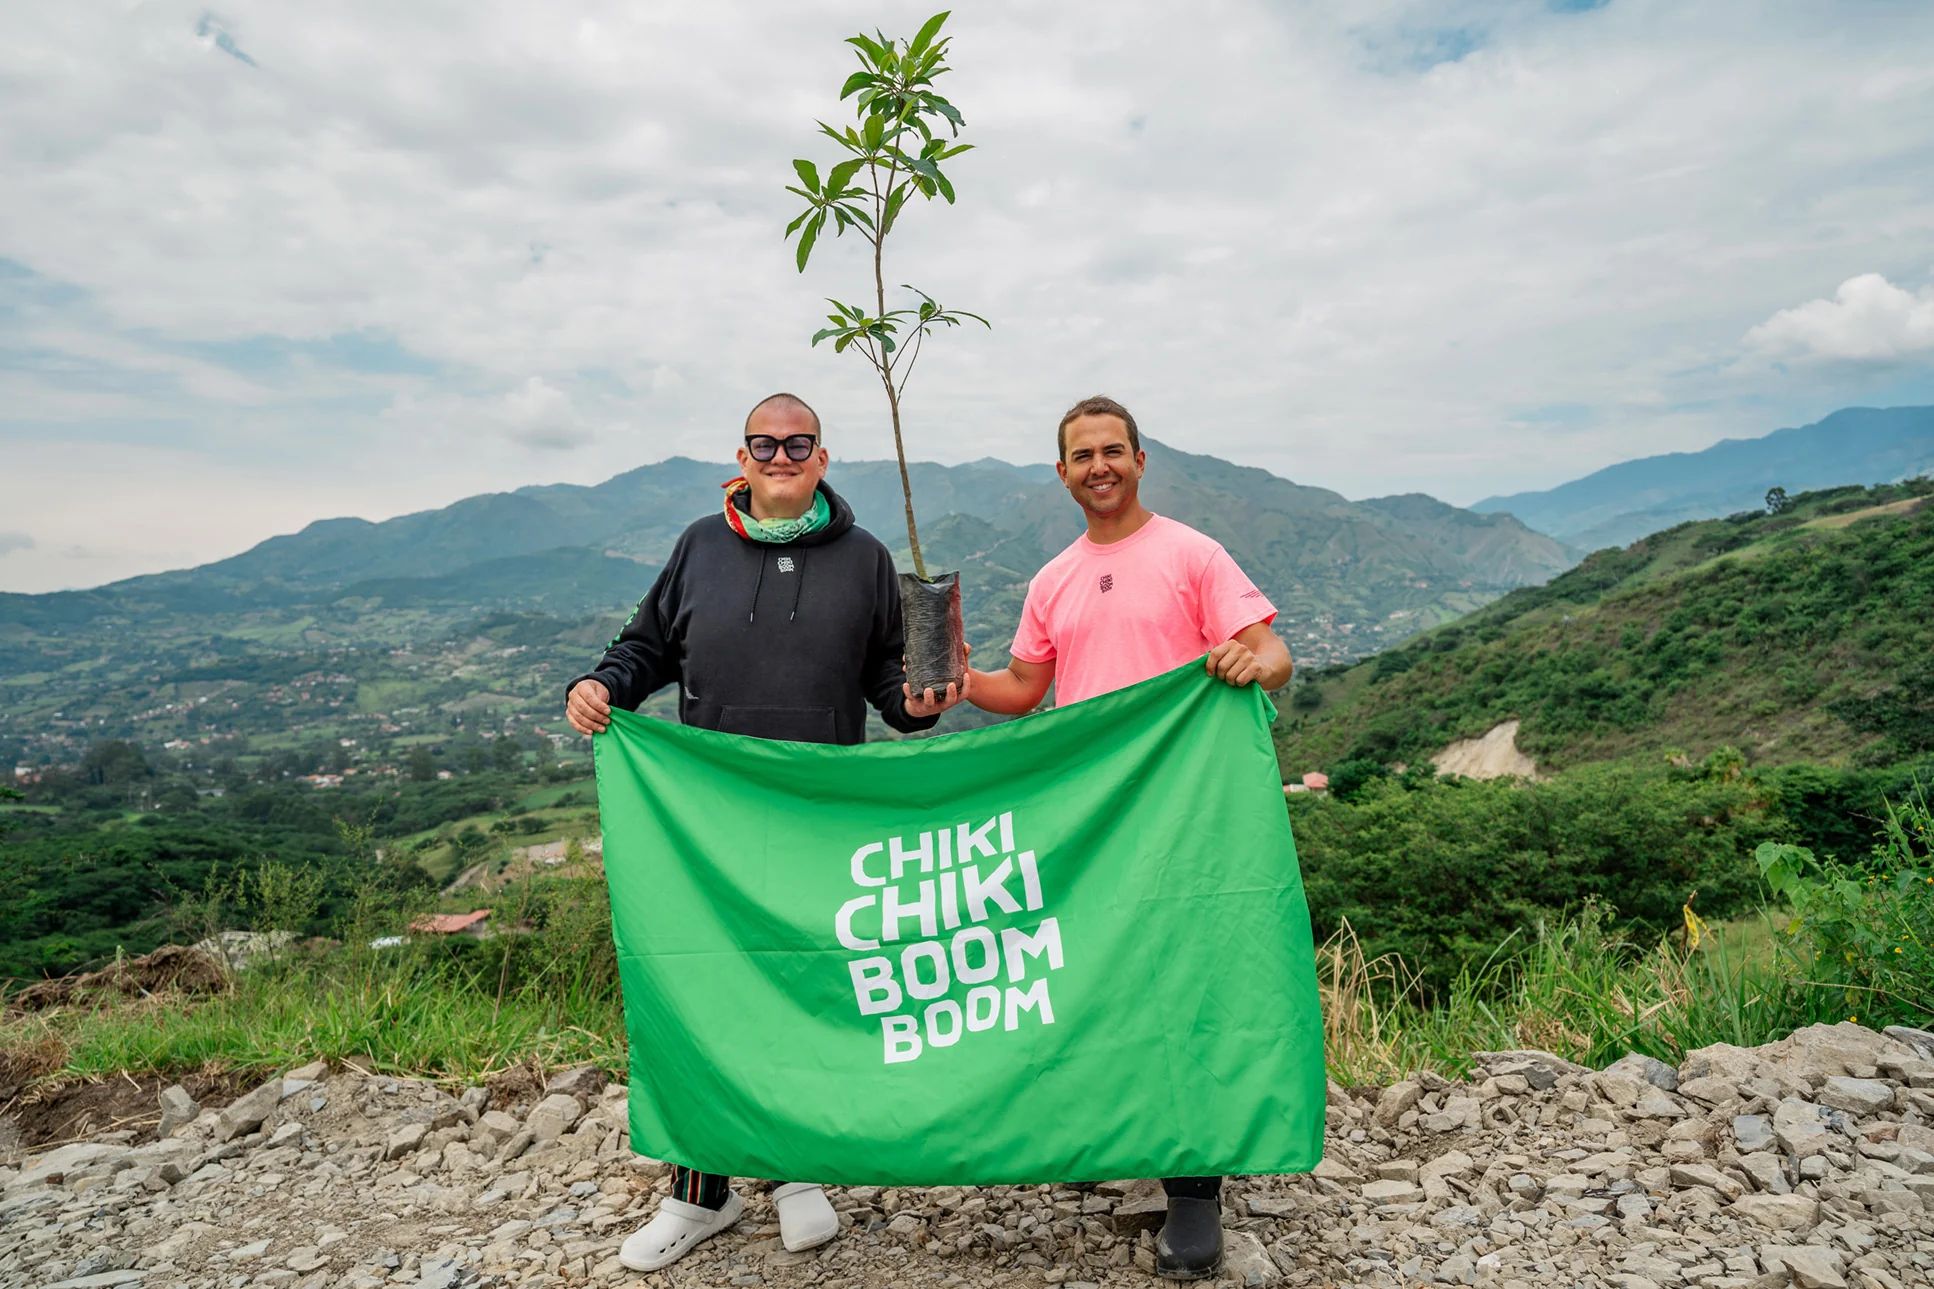 Chiki Chiki Boom Boom’s founders holding a sign and a small tree on top of a mountain